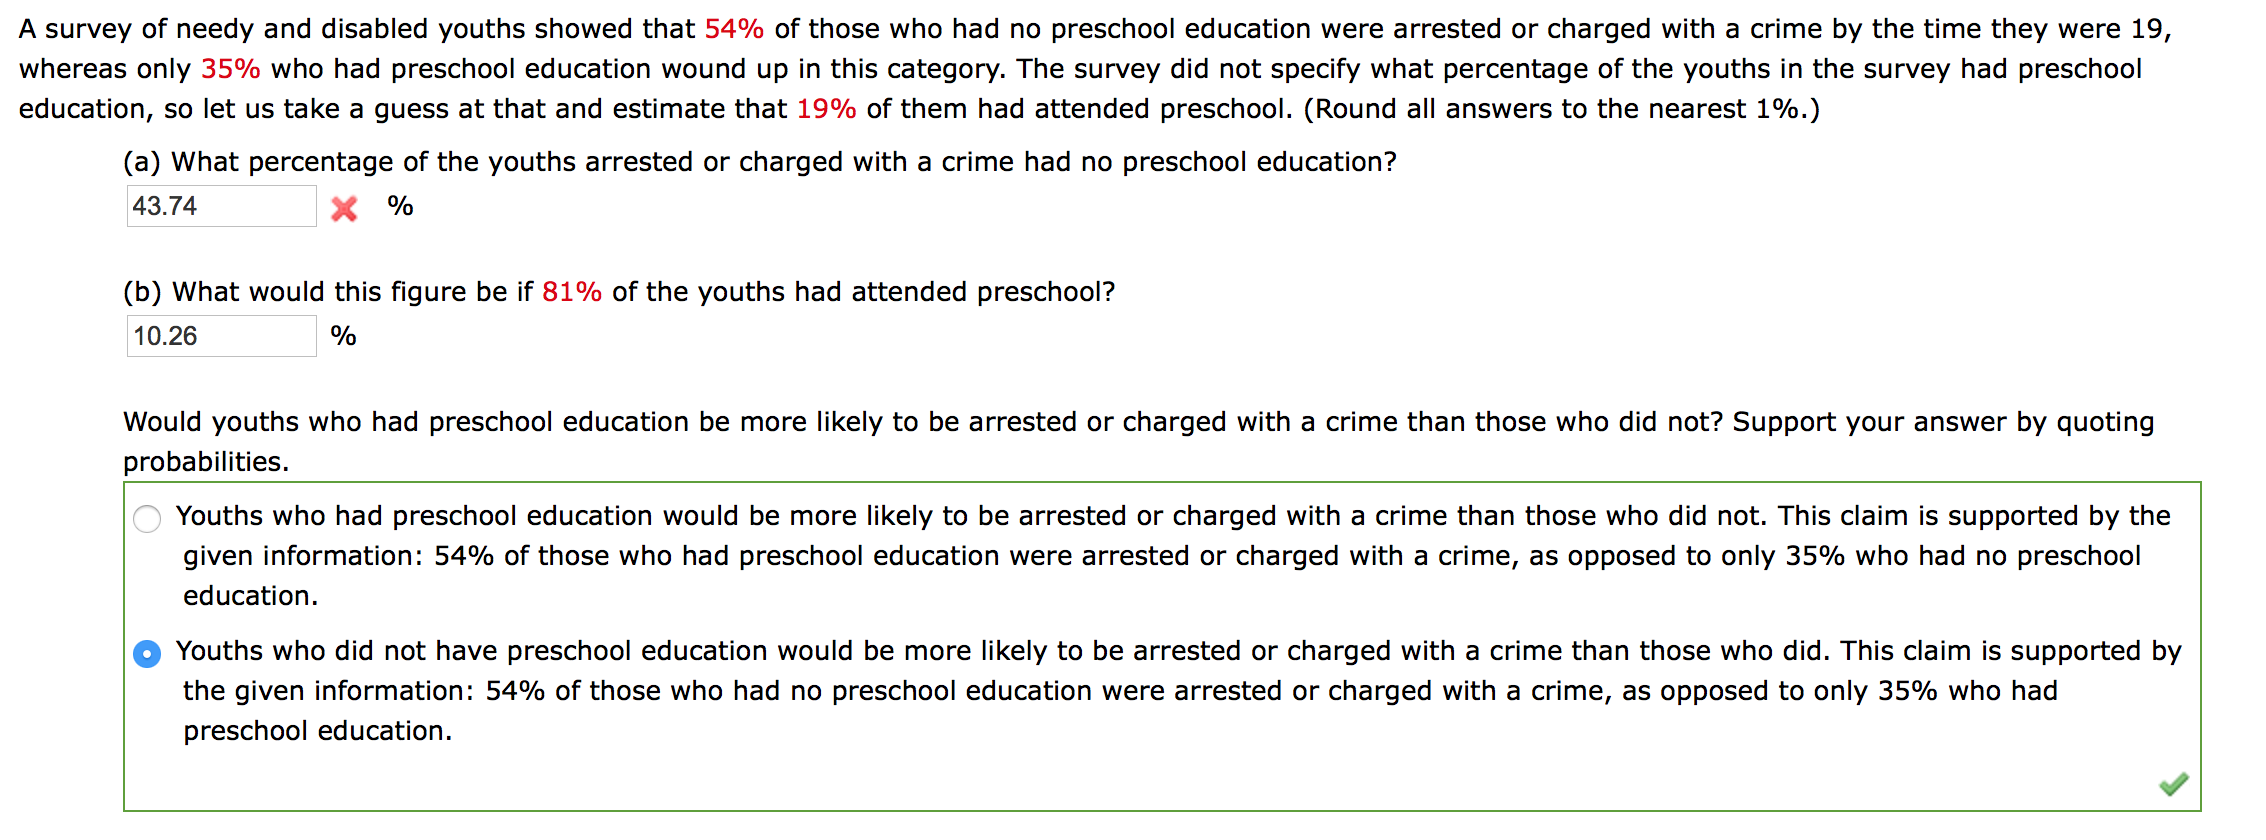 A survey of needy and disabled youths showed that 54% of those who had no preschool education were arrested or charged with a crime by the time they were 19,
whereas only 35% who had preschool education wound up in this category. The survey did not specify what percentage of the youths in the survey had preschool
education, so let us take a guess at that and estimate that 19% of them had attended preschool. (Round all answers to the nearest 1%.)
(a) What percentage of the youths arrested or charged with a crime had no preschool education?
43.74
X %
(b) What would this figure be if 81% of the youths had attended preschool?
10.26
%
Would youths who had preschool education be more likely to be arrested or charged with a crime than those who did not? Support your answer by quoting
probabilities.
Youths who had preschool education would be more likely to be arrested or charged with a crime than those who did not. This claim is supported by the
given information: 54% of those who had preschool education were arrested or charged with a crime, as opposed to only 35% who had no preschool
education.
Youths who did not have preschool education would be more likely to be arrested or charged with a crime than those who did. This claim is supported by
the given information: 54% of those who had no preschool education were arrested or charged with a crime, as opposed to only 35% who had
preschool education.
